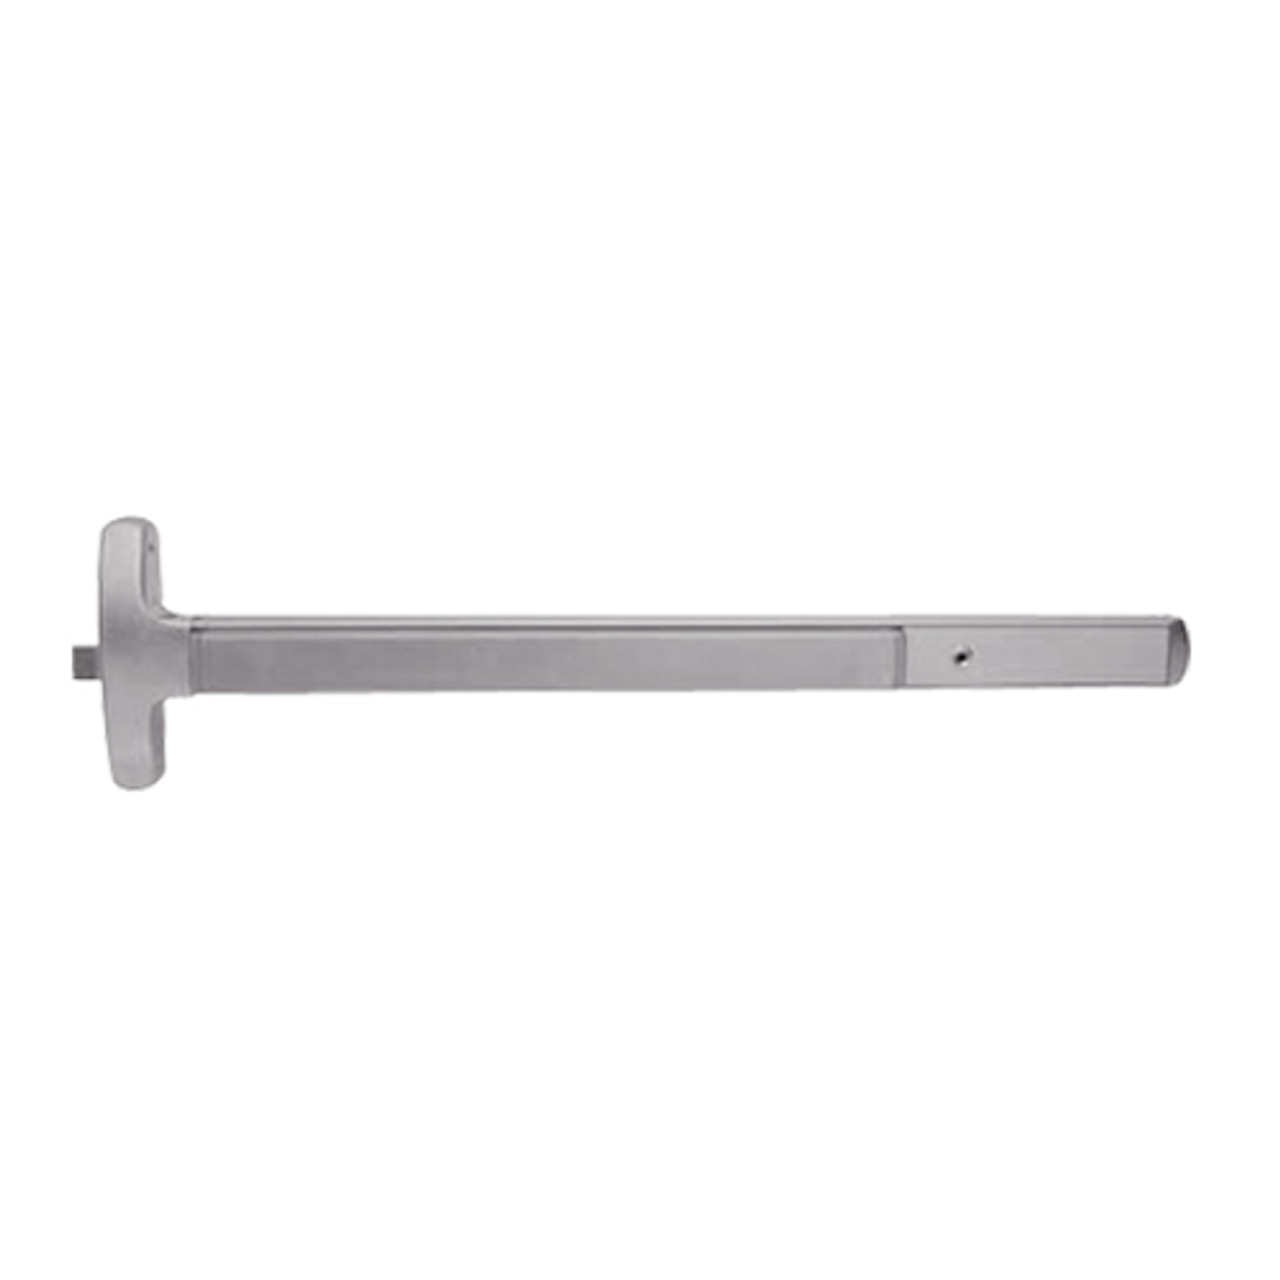 24-R-NL-OP-US32D-3 Falcon Exit Device in Satin Stainless Steel